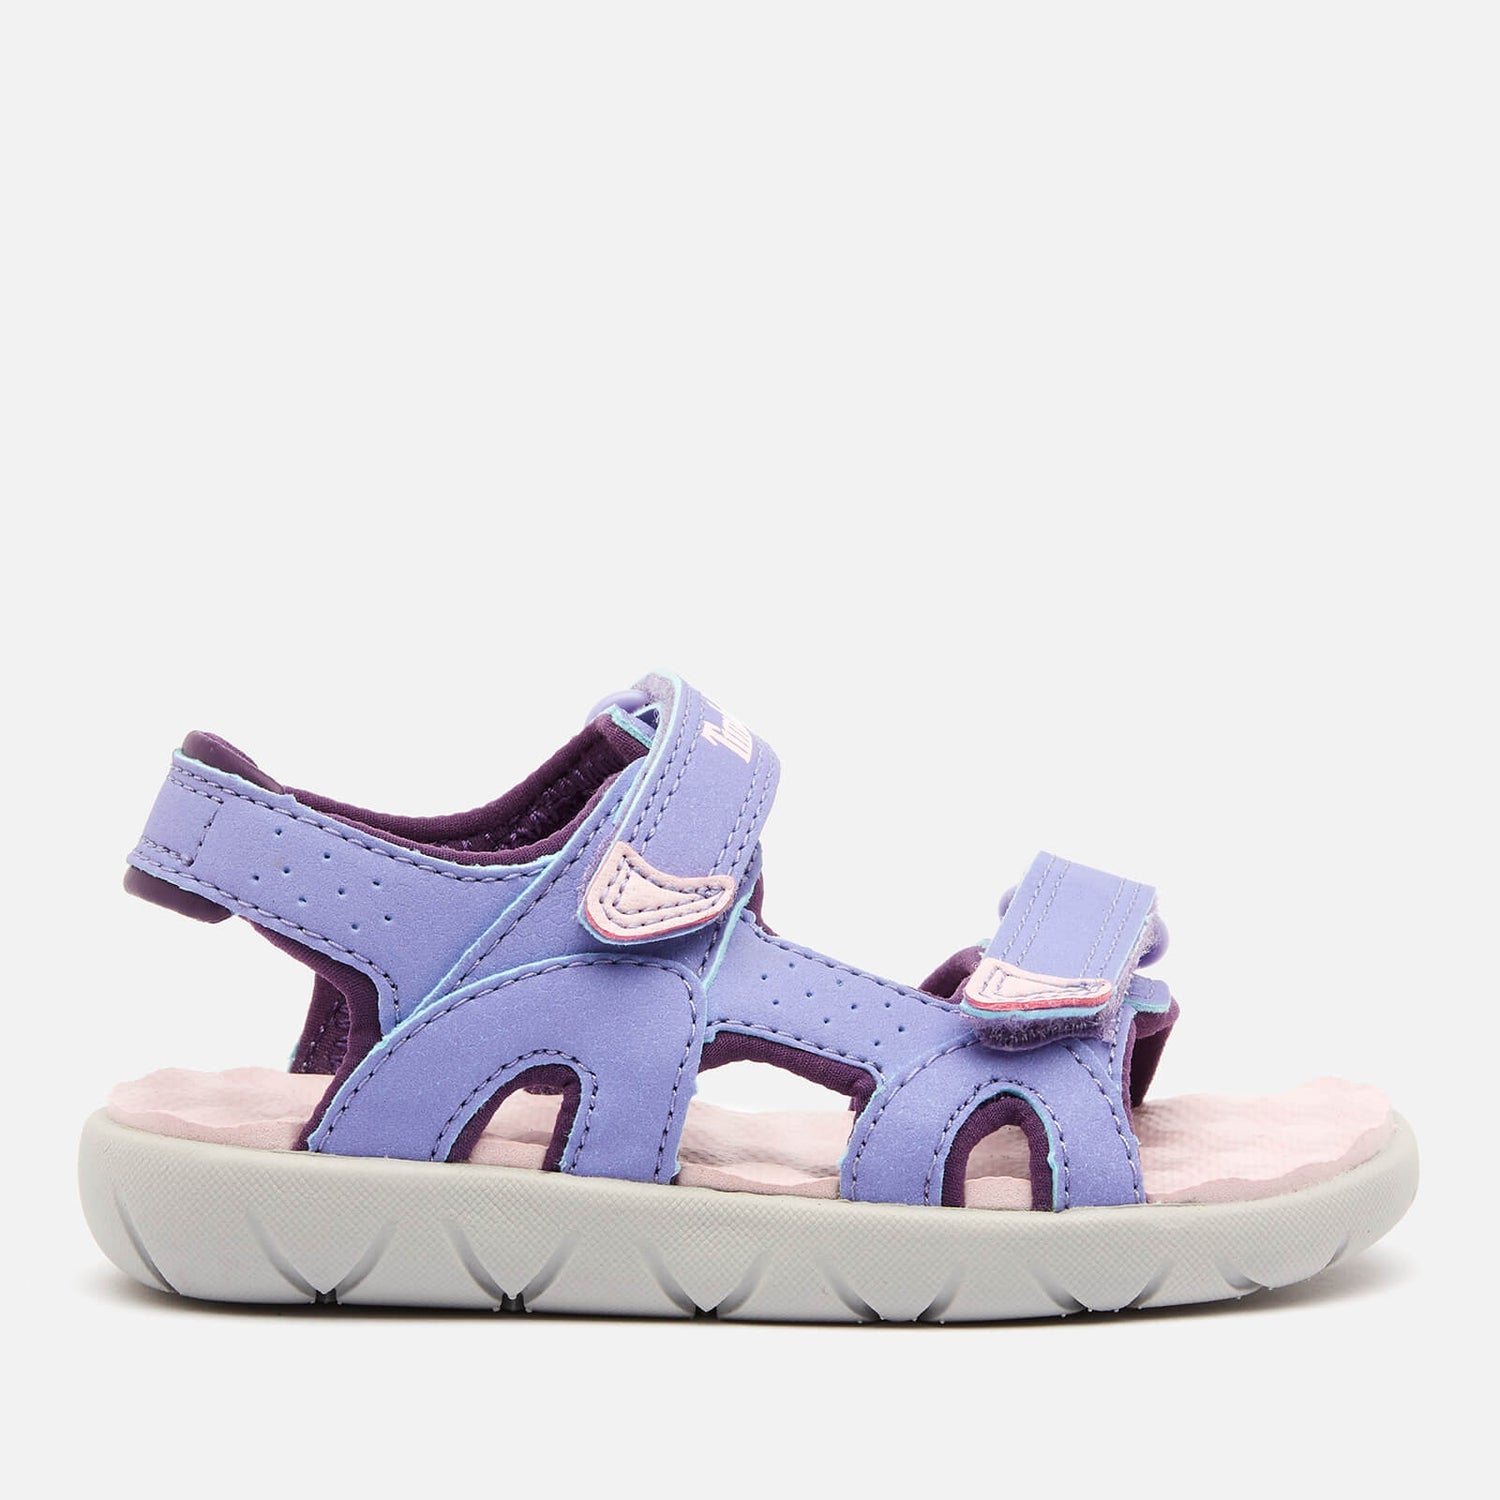 Timberland Toddlers' Perkins Row 2-Strap Sandals - Light Purple